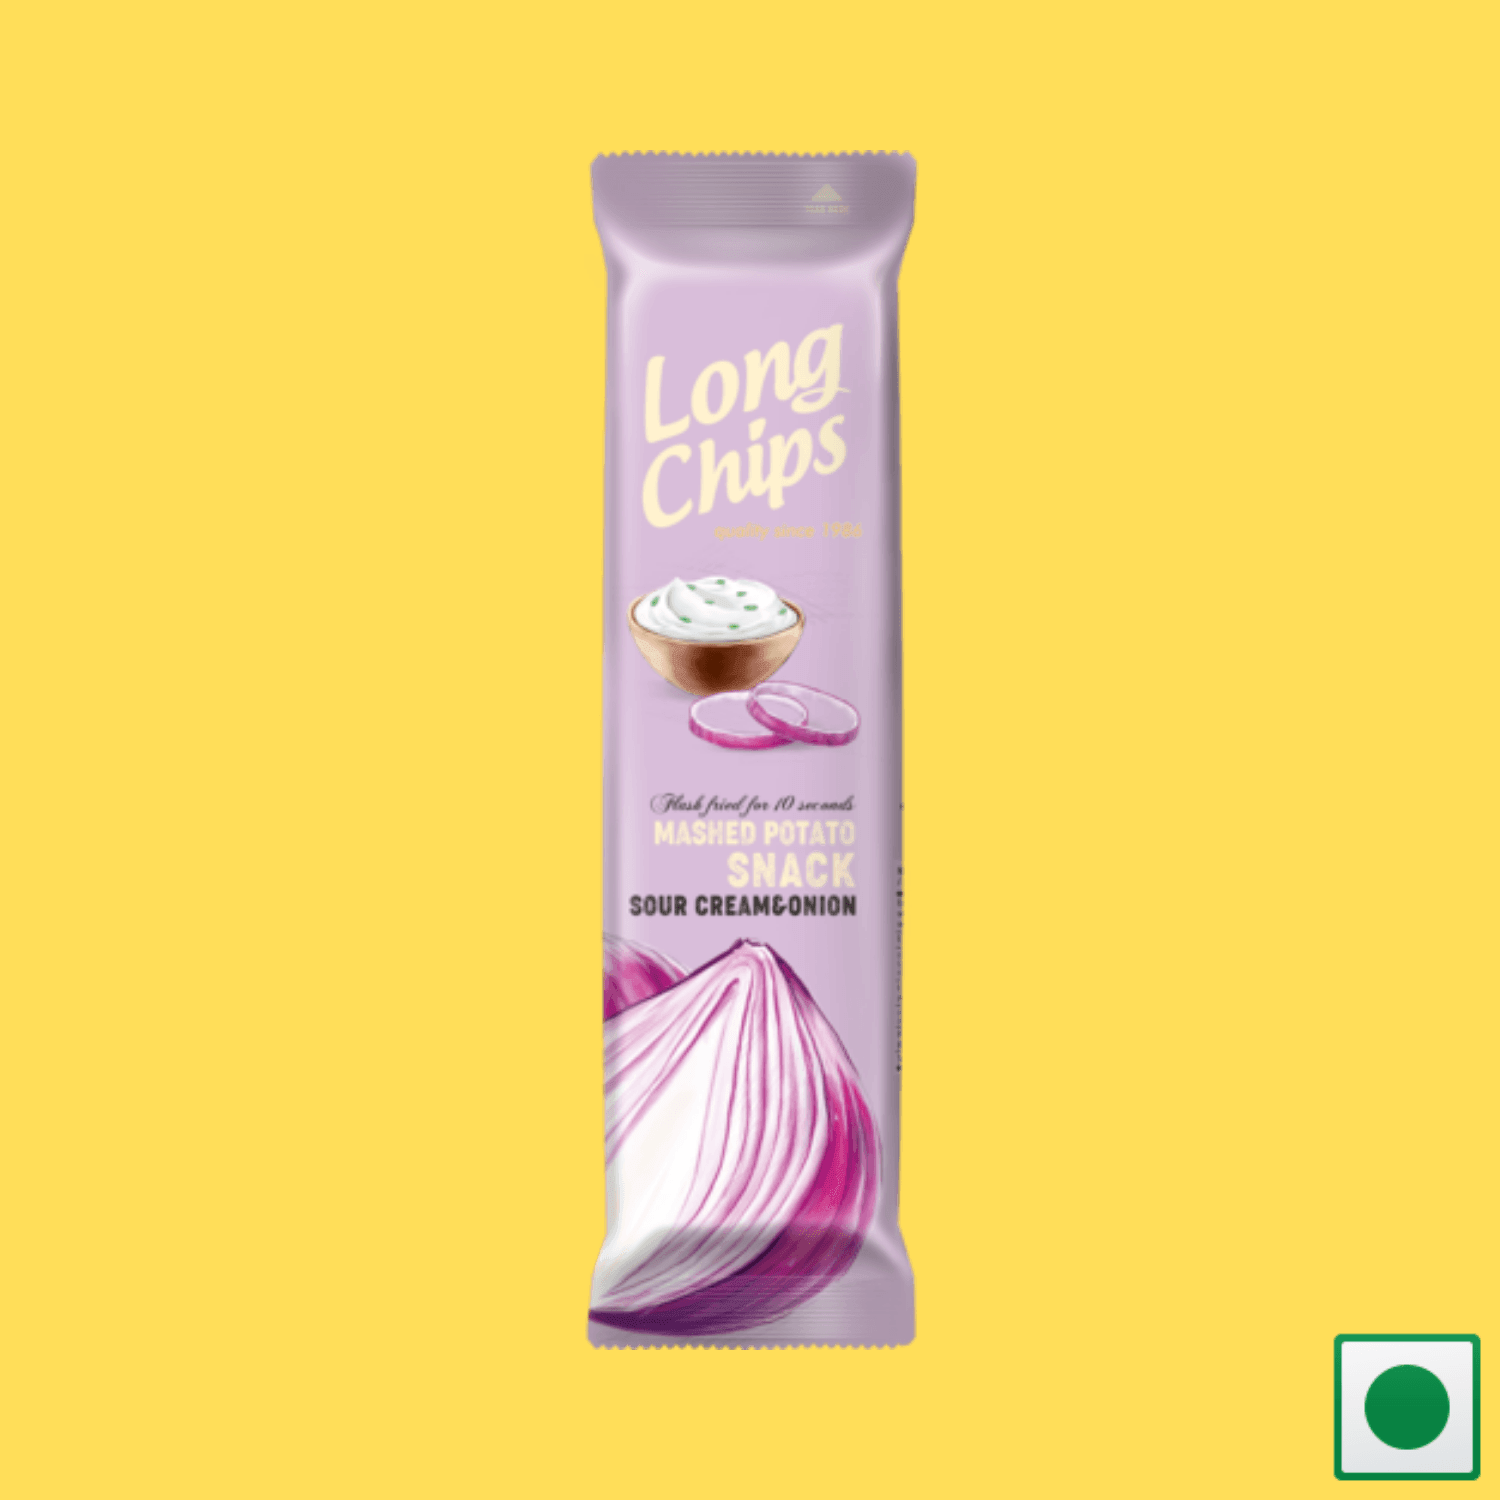 Long Chips Mashed Potato Snack Sour Cream & Onion Flavoured, 75g (Imported) - Super 7 Mart